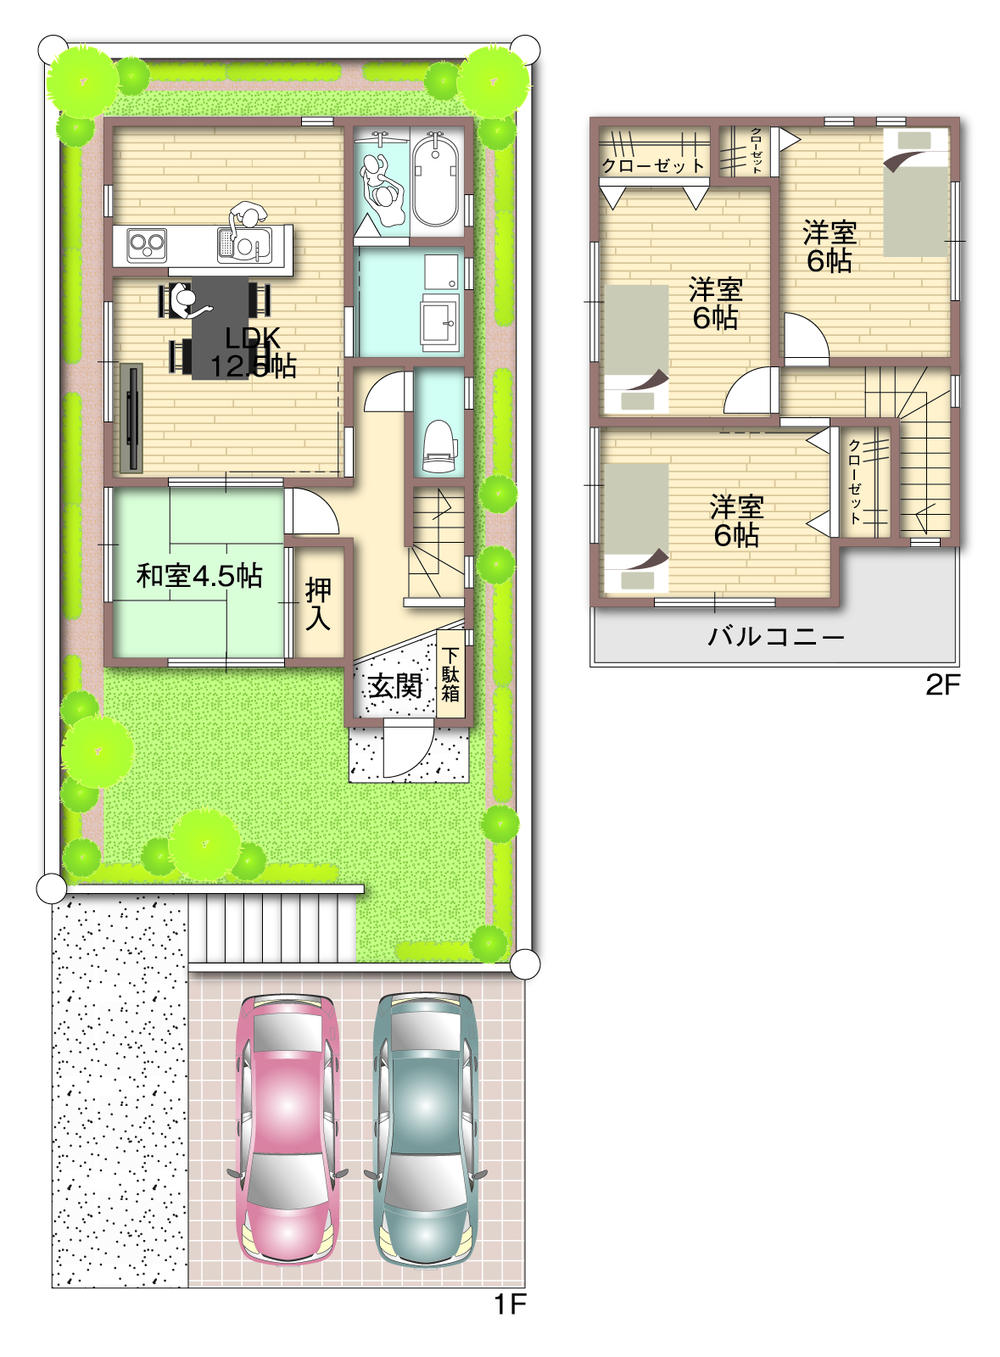 Compartment view + building plan example. Building plan example, Land price 19.6 million yen, Land area 130.58 sq m , Building price 16,970,000 yen, Building area 89.1 sq m garage three Allowed 4LDK plan